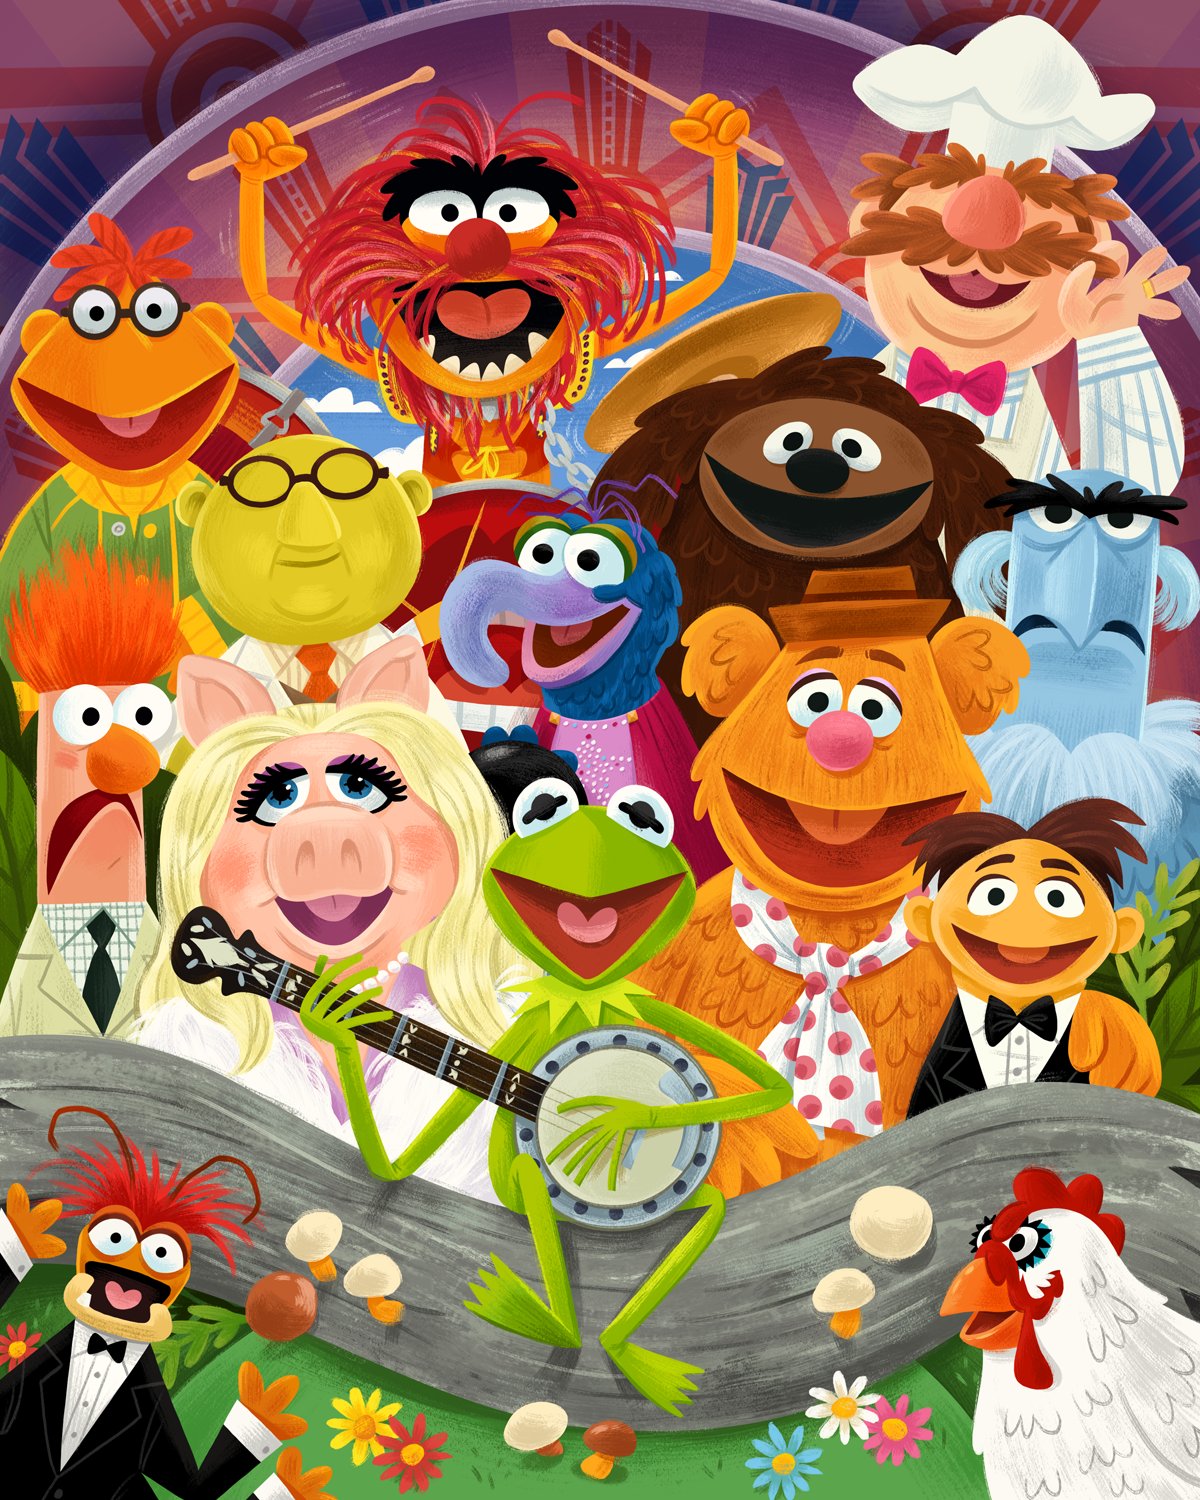 The Muppets This Day In We Returned To Movie Theaters With Our Oscar Winning Film The Muppets! That Means Academy Award Winning Man Or Muppet Has Been Stuck In